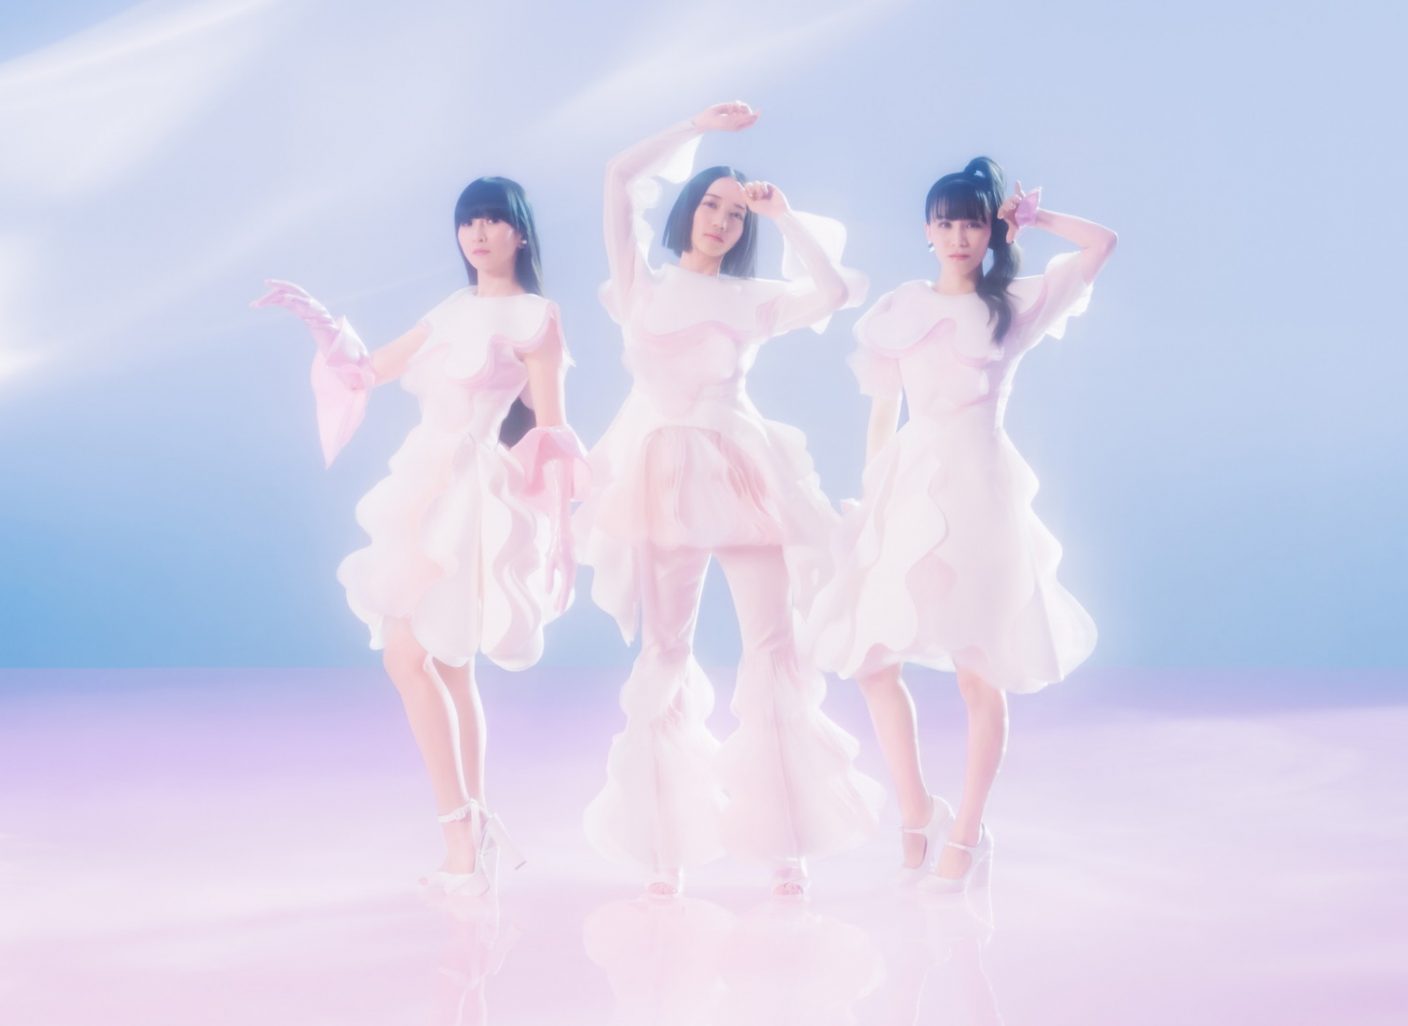 Perfume Flow ドラマ ファイトソング 胸キュンシーン満載のweb限定ロングトレイラー公開 The First Times